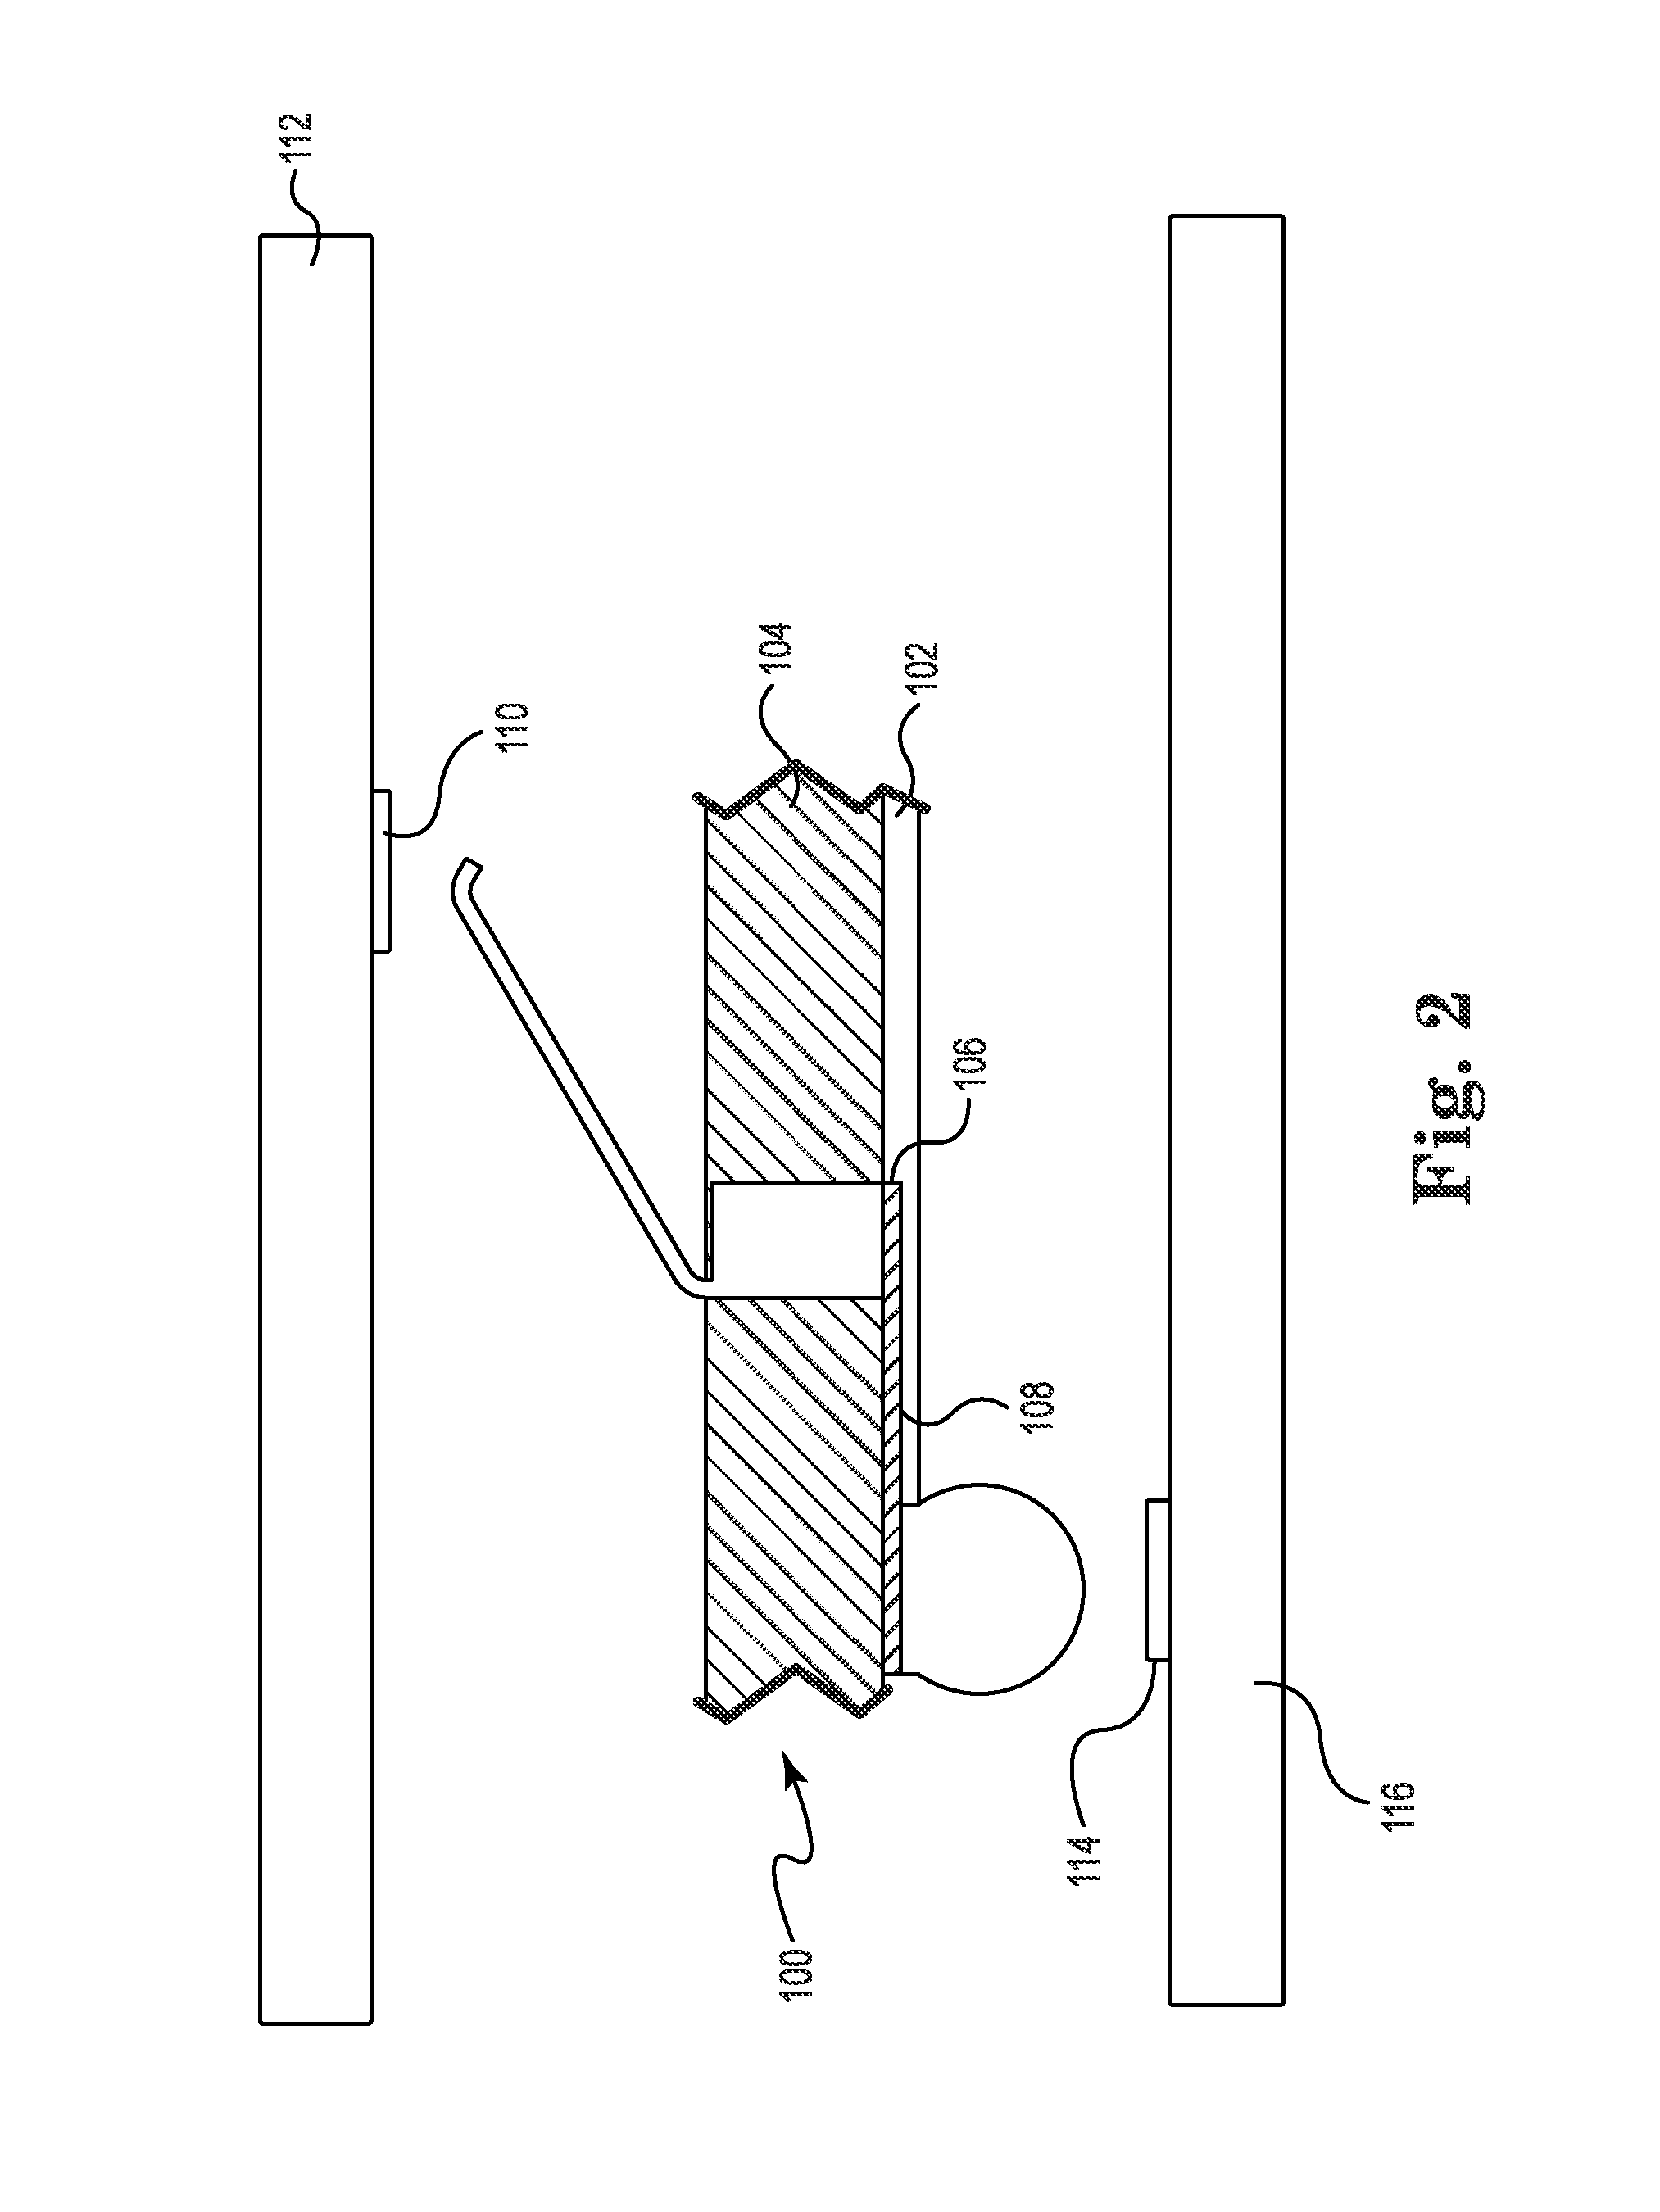 Method of forming a semiconductor socket